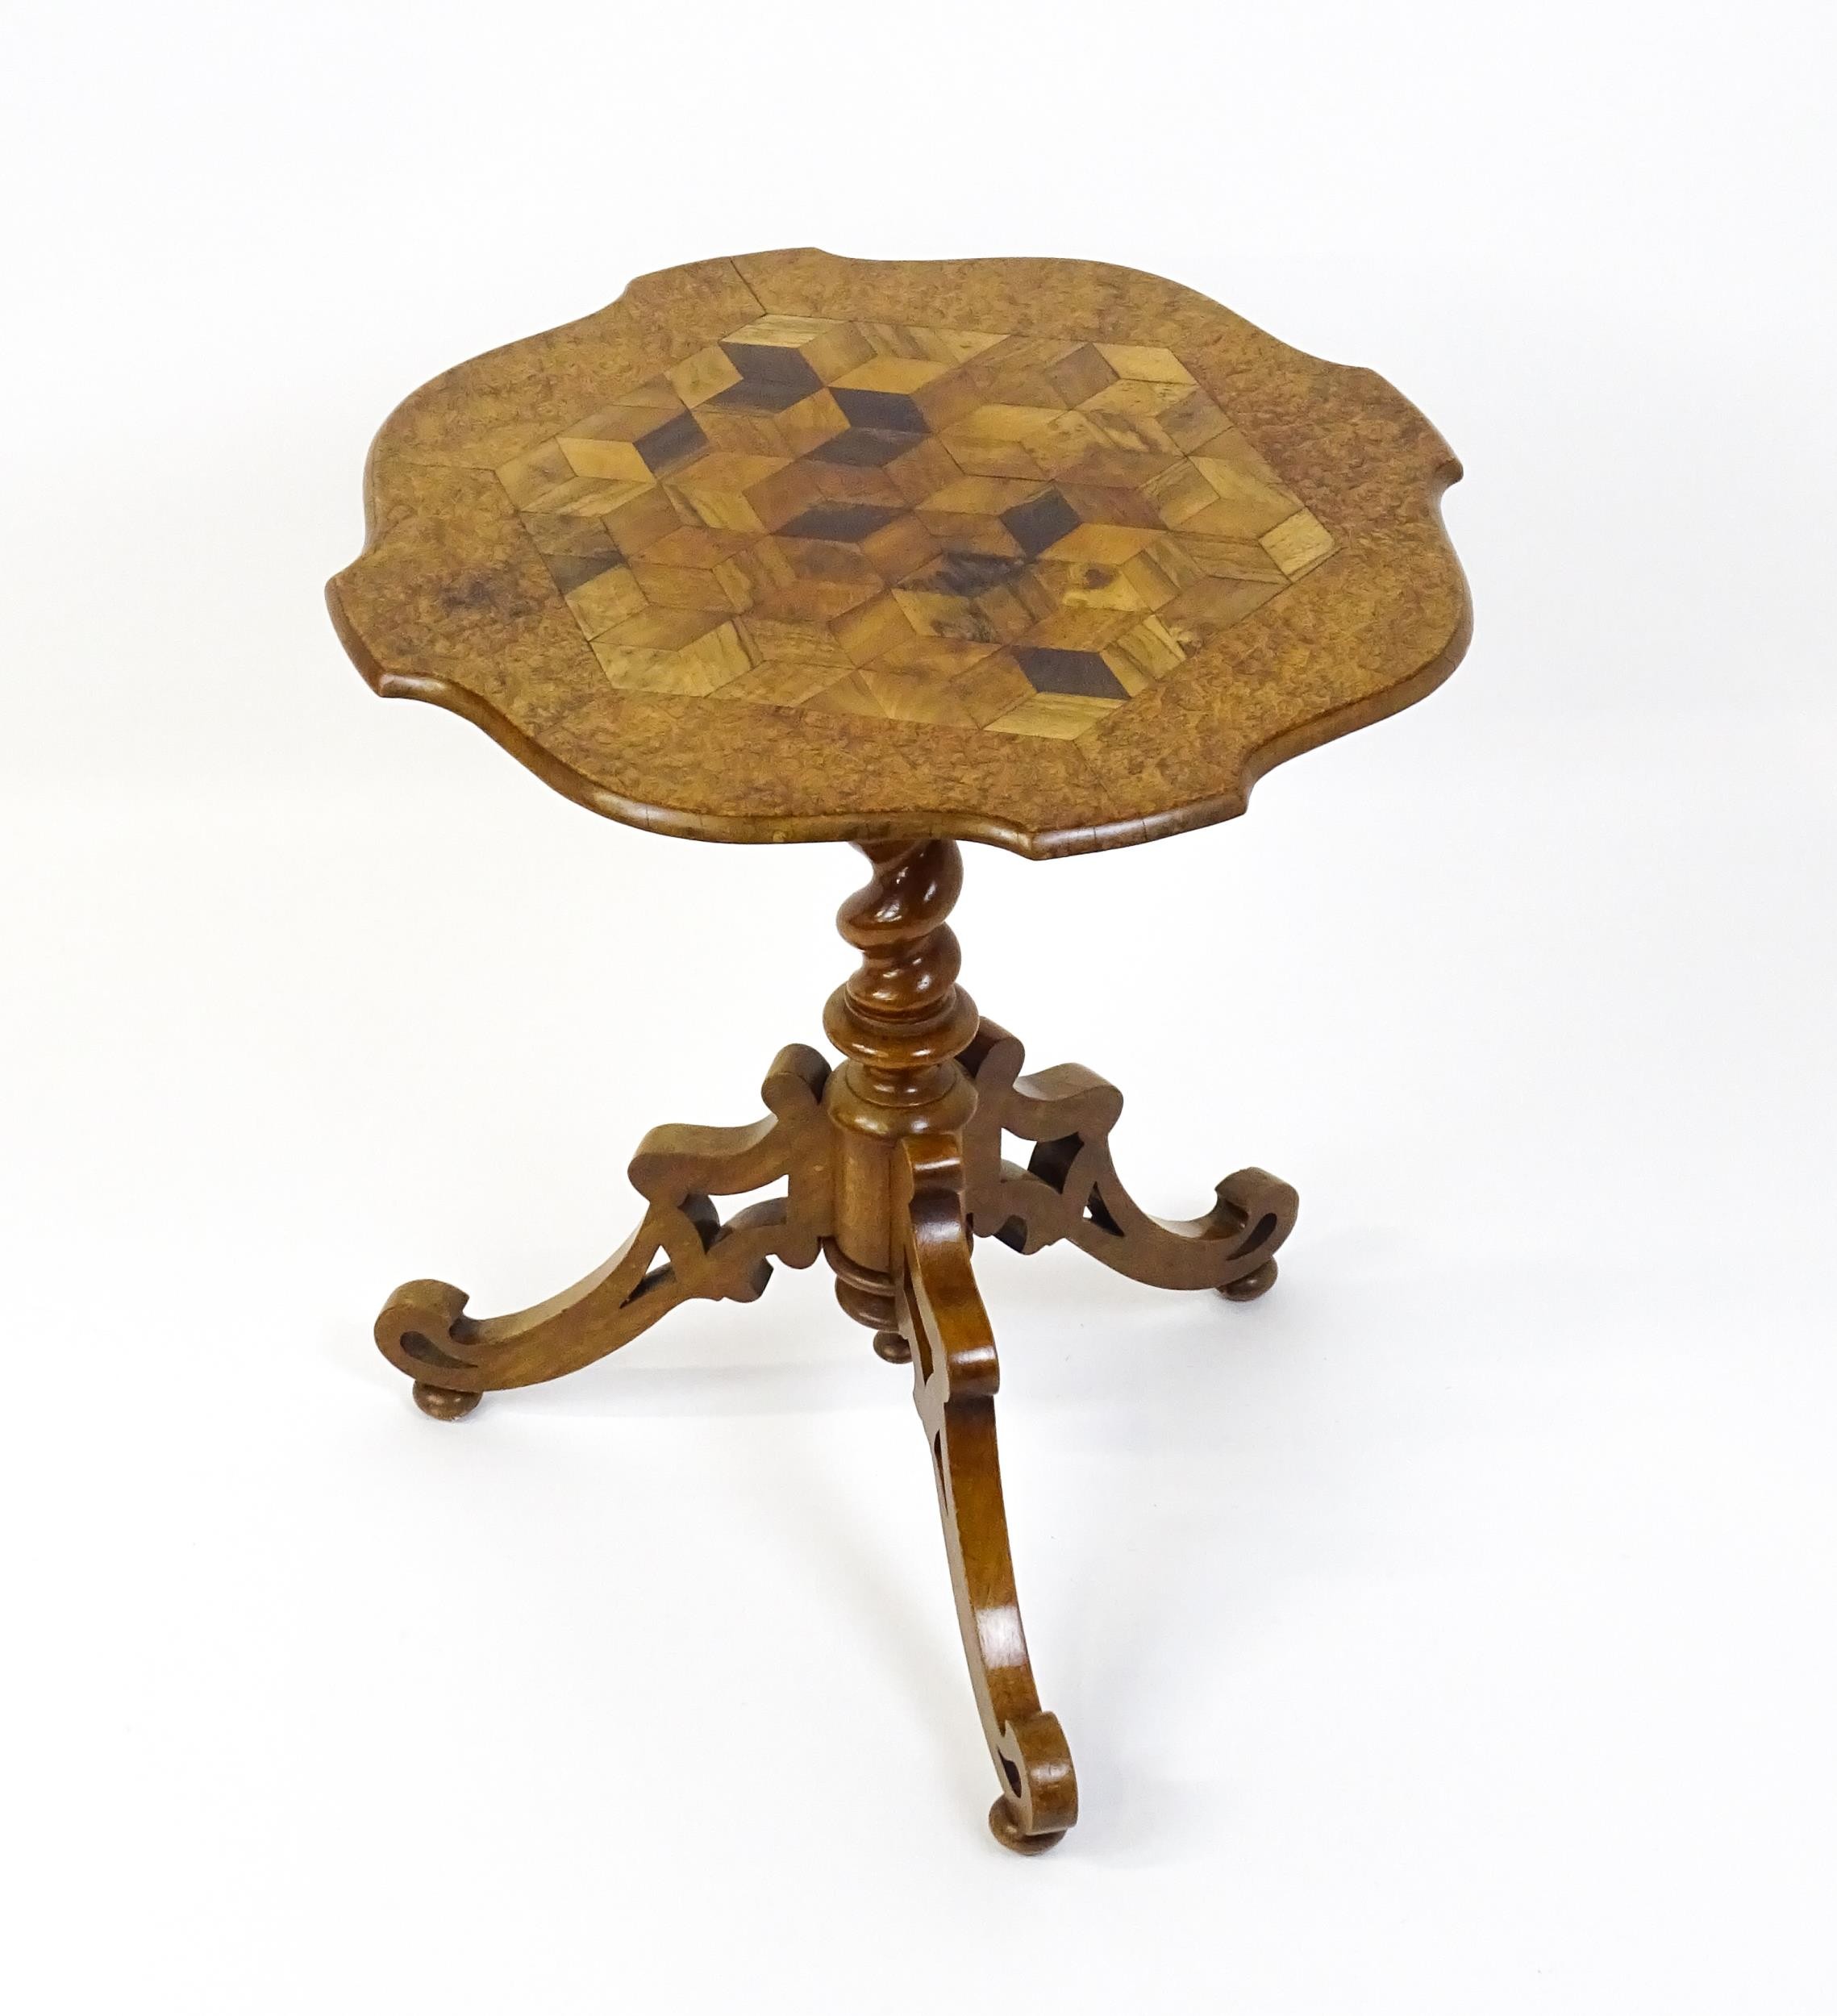 A 19thC tripod table with a burr amboyna veneered top surrounding a central parquetry style sample